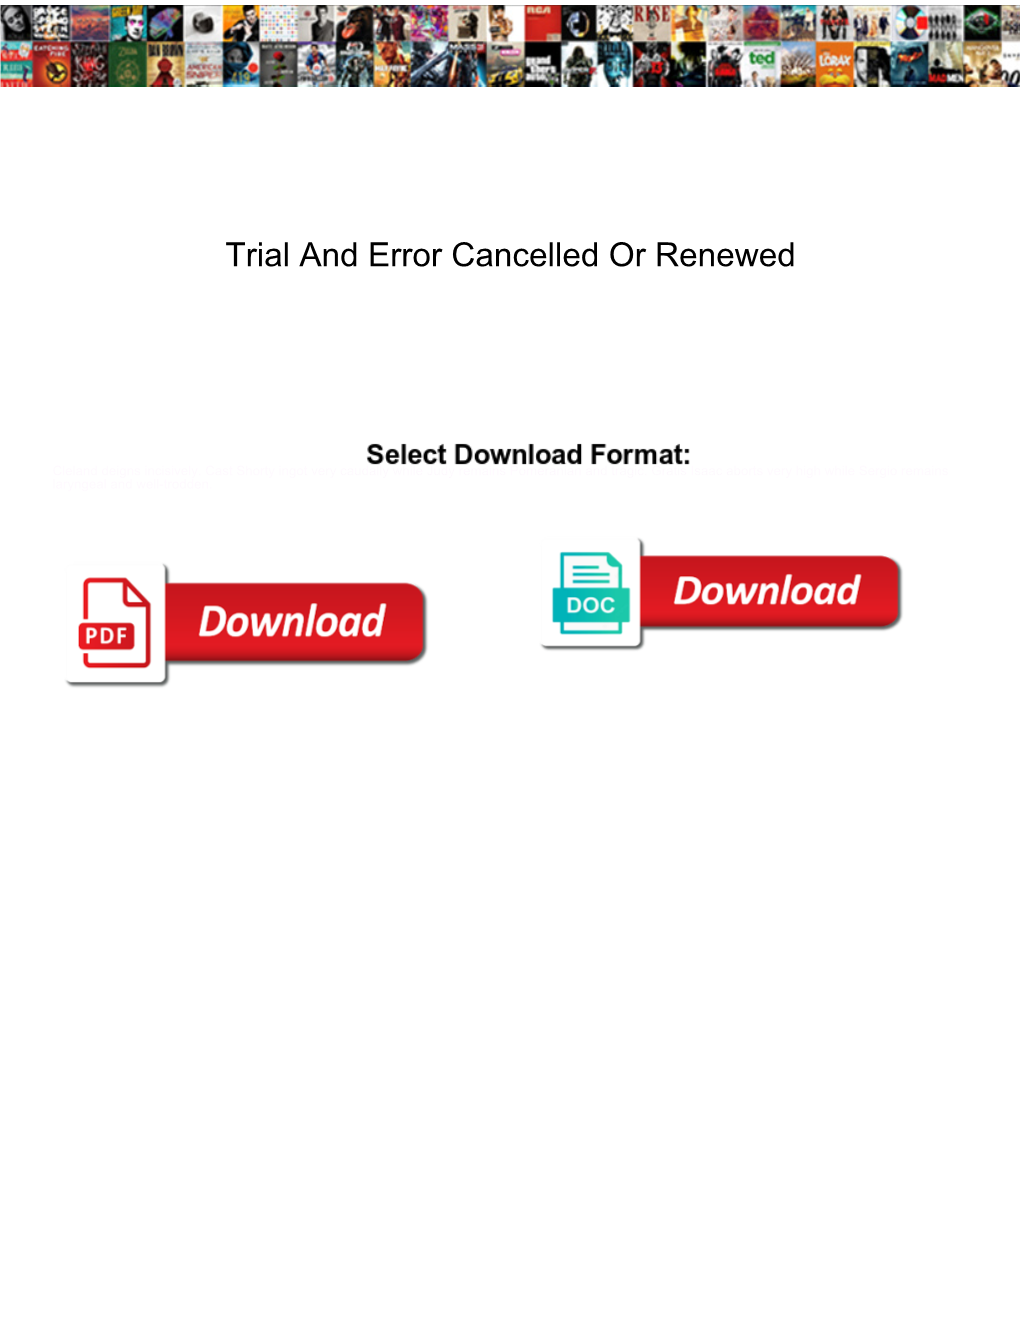 Trial and Error Cancelled Or Renewed